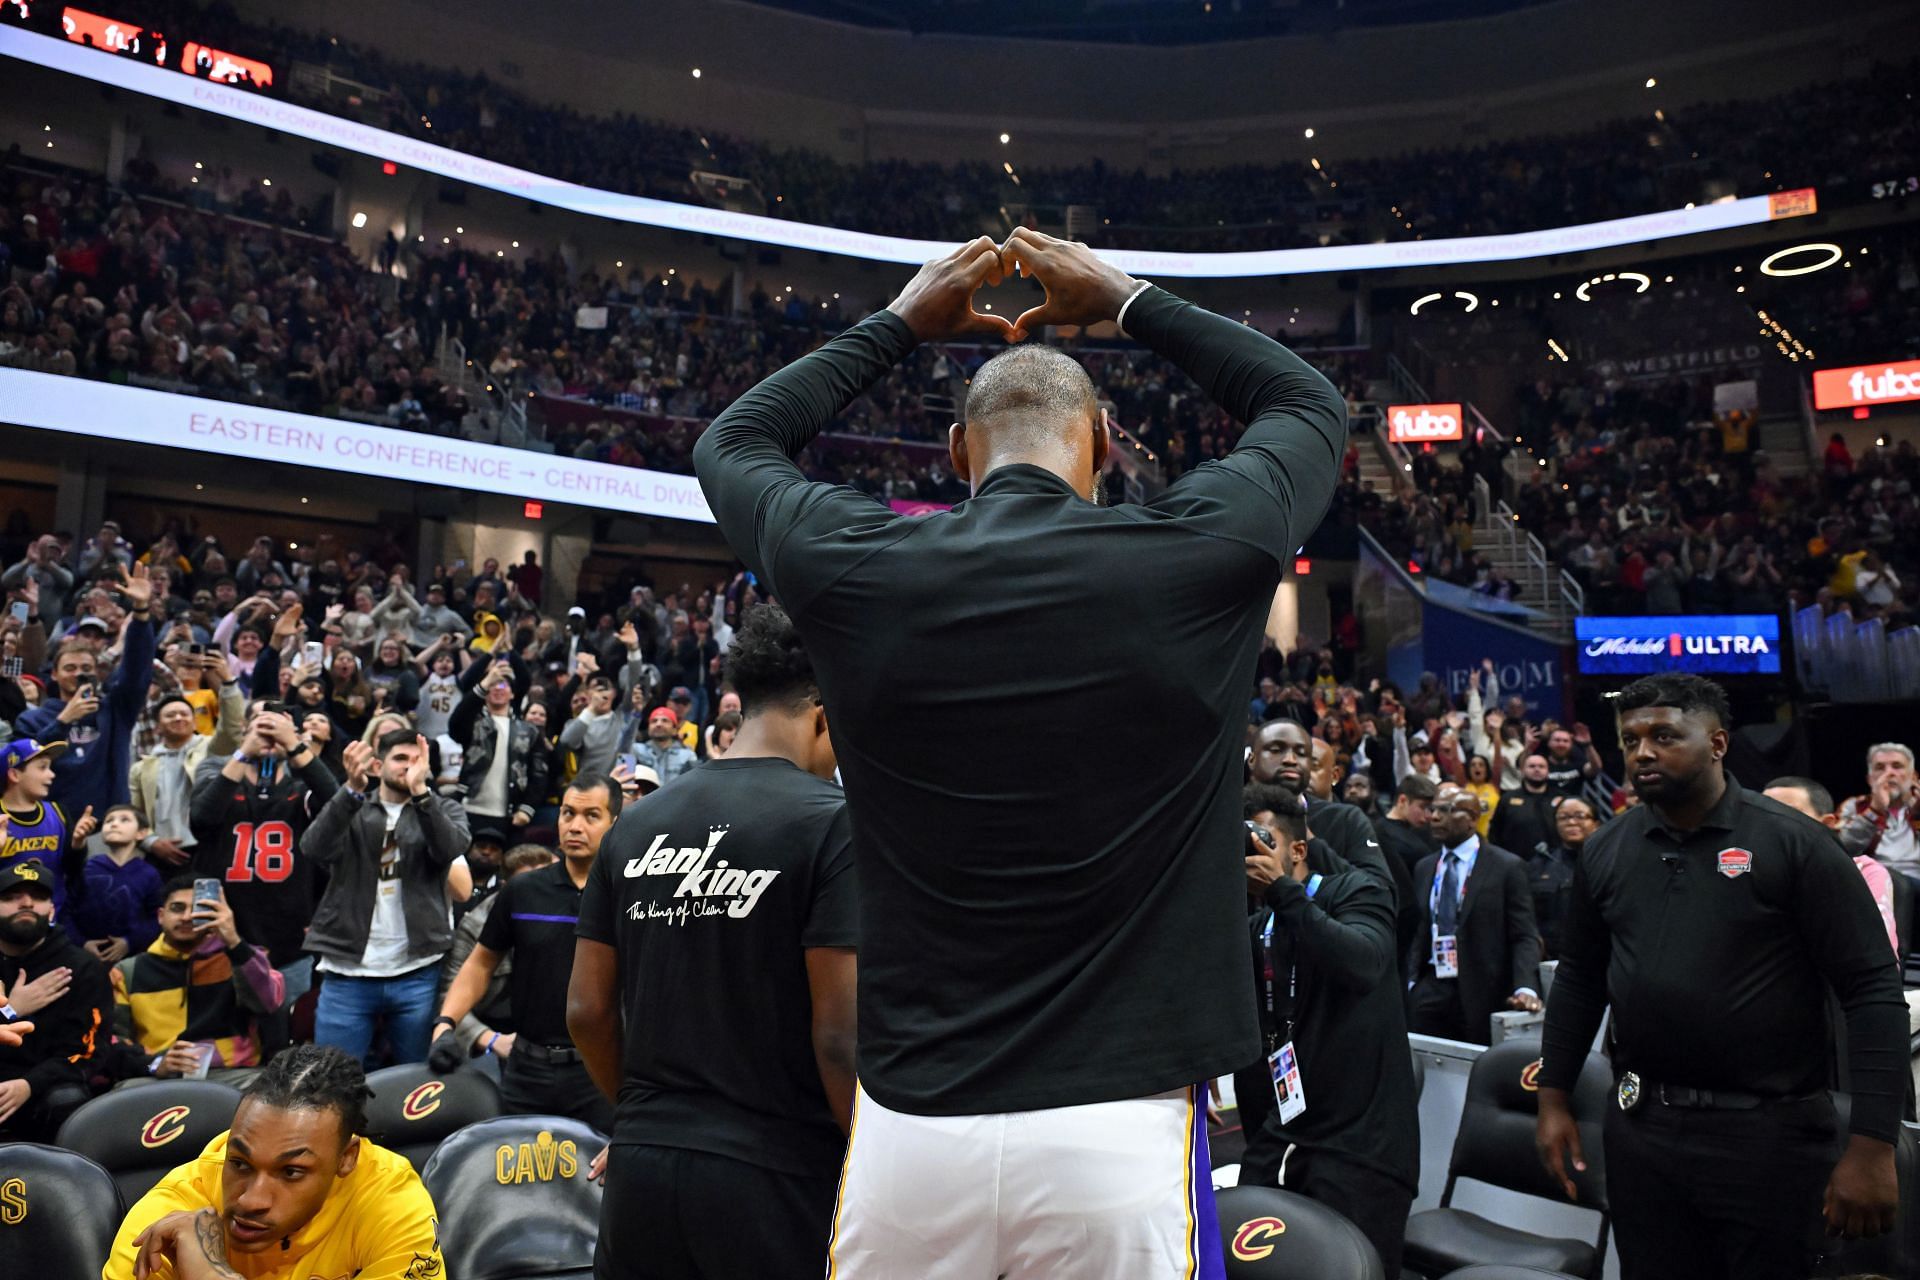 LeBron James shows love to Cleveland crowd